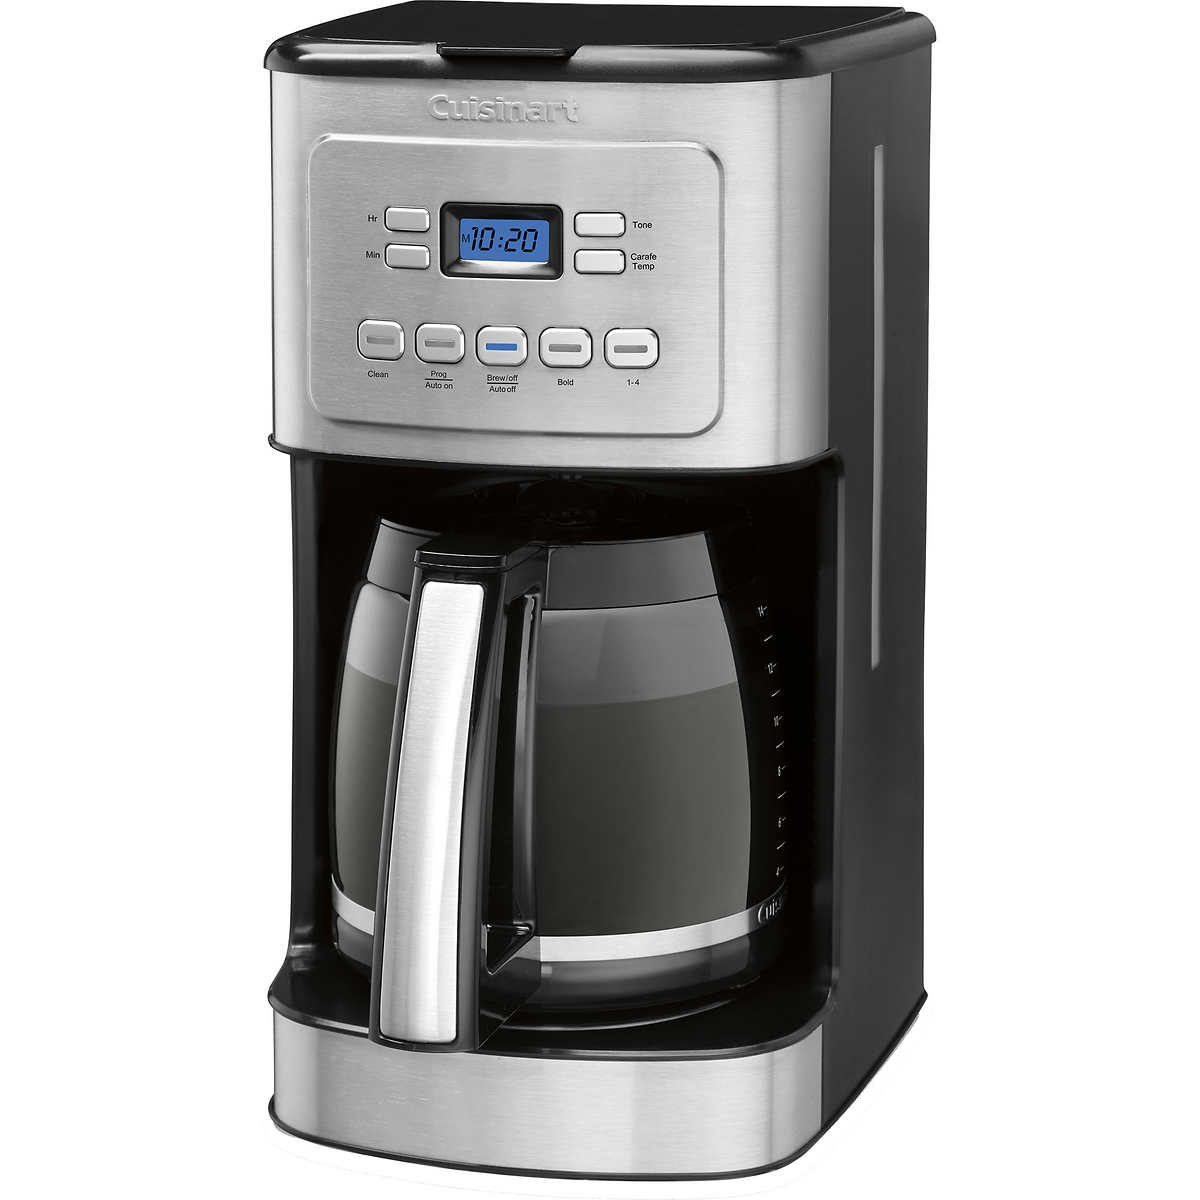 New CUISINART BREW CENTRAL 14 CUP PROGRAMMABLE COFFEEMAKER